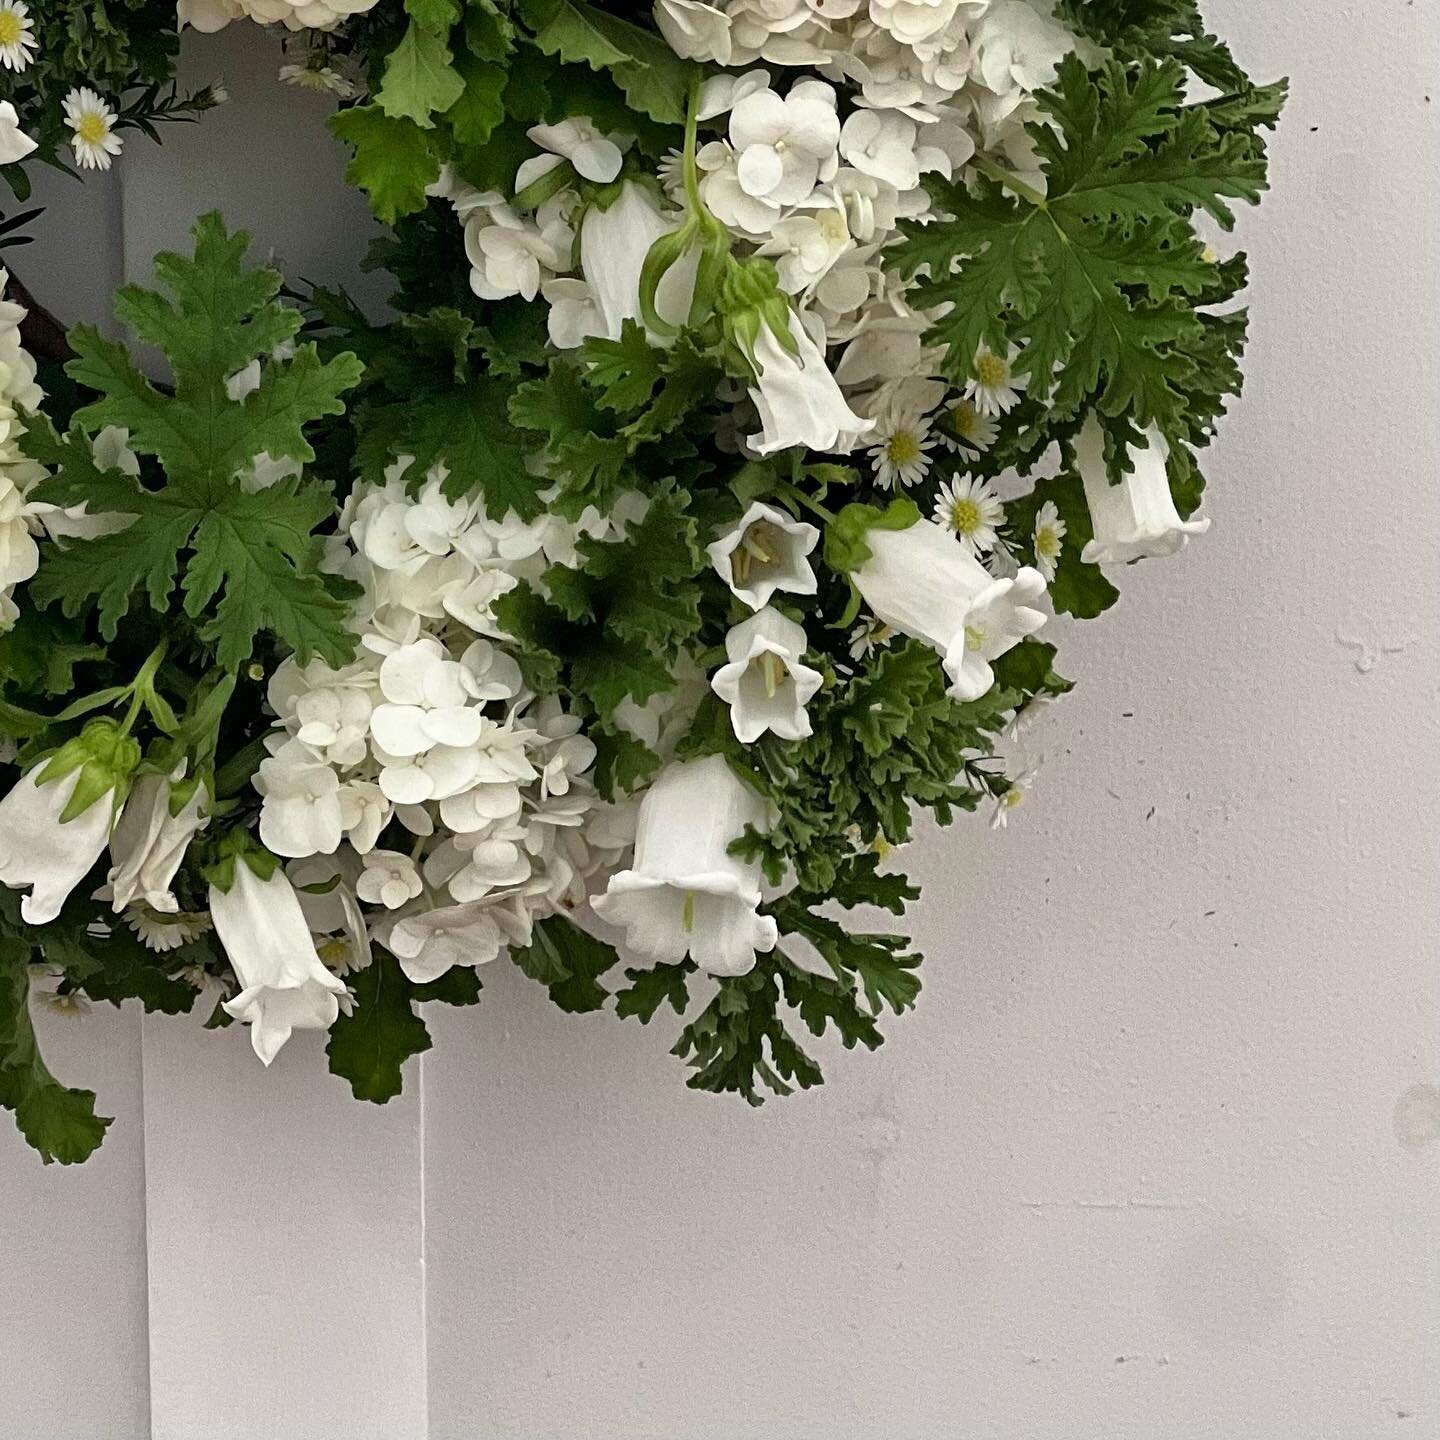 I&rsquo;m pretty much in love with the wreaths I created last weekend for Lindsey &amp; Dean. 

#manchestervtwedding #churchdoor #whitegreen #campanula #geranium #vermontflowers #weddingflowers #timelessdesign #vermontwedding #manchestervt #classicwe